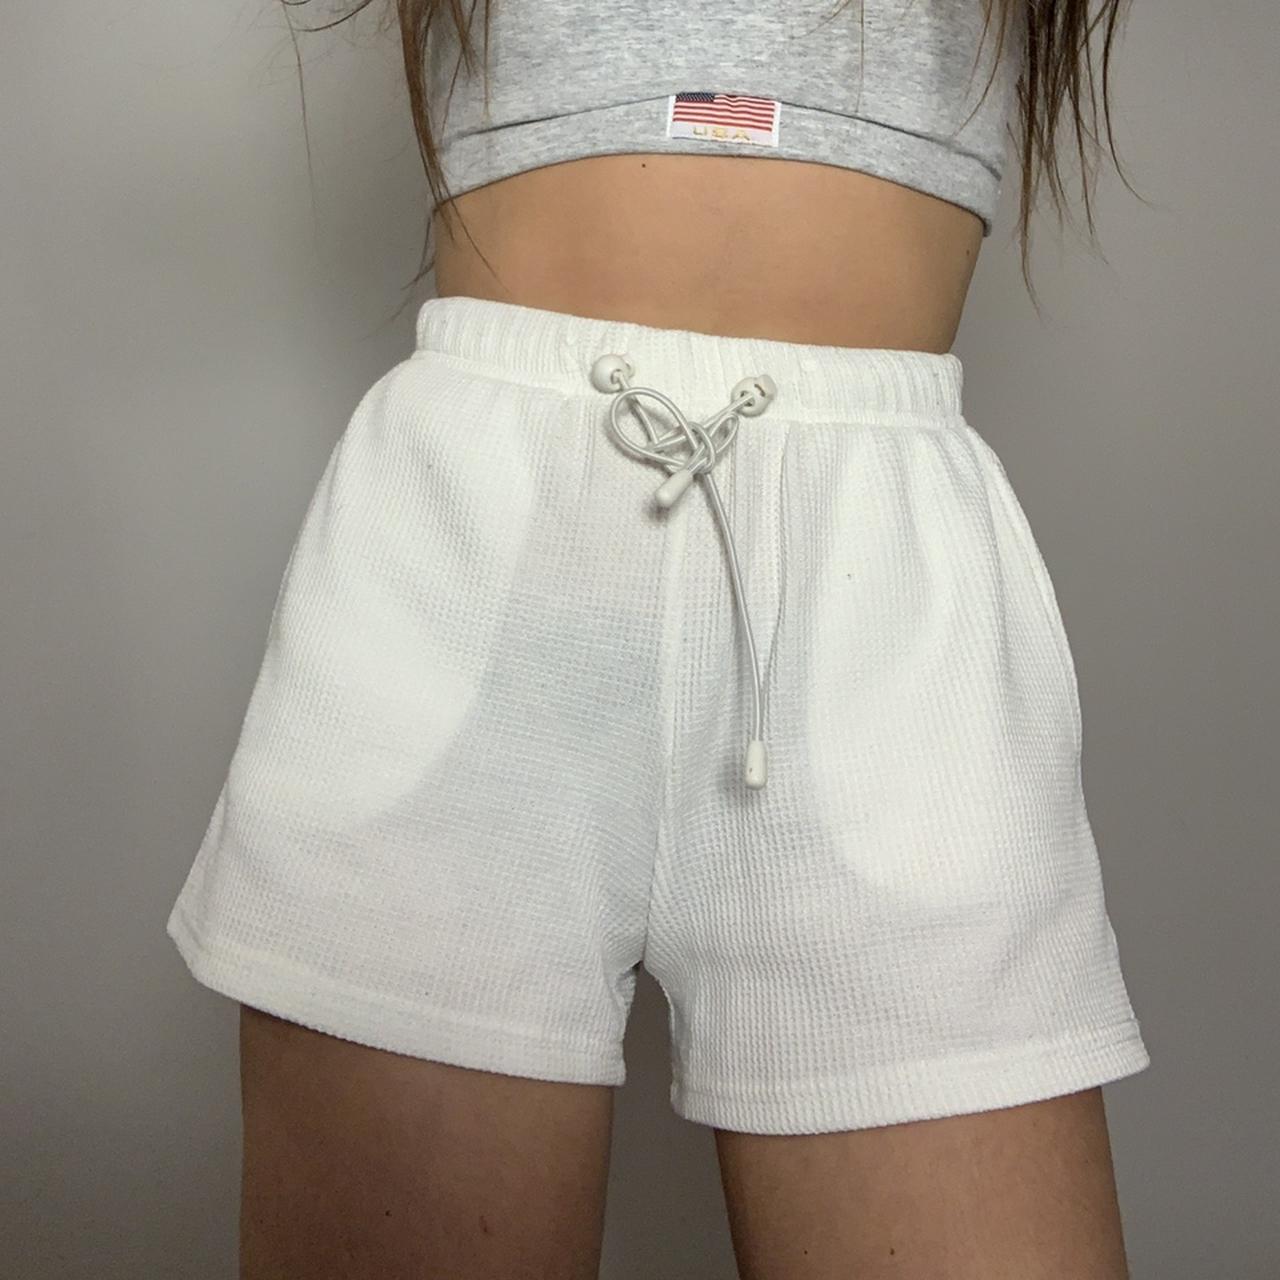 PRINCESS POLLY BEACH SHORTS // size 2 would best fit... - Depop